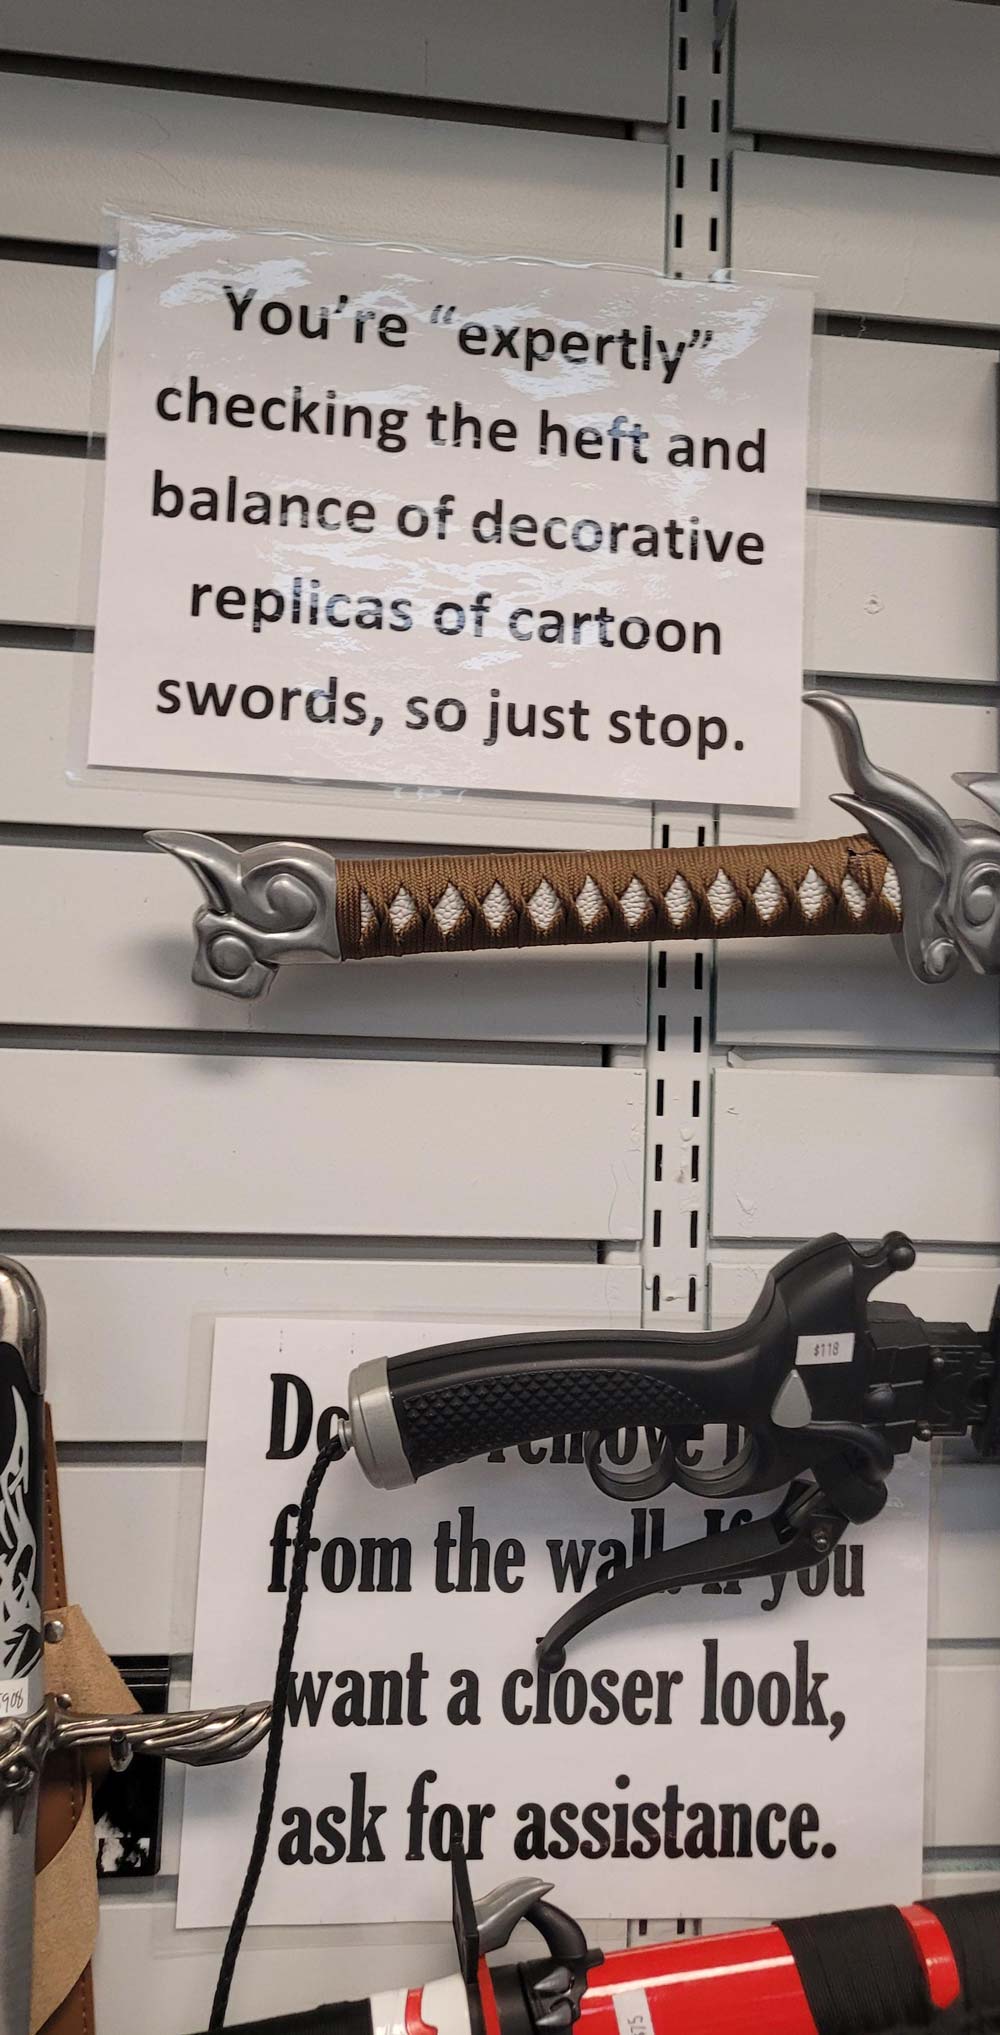 Found at my local "mall sword store"